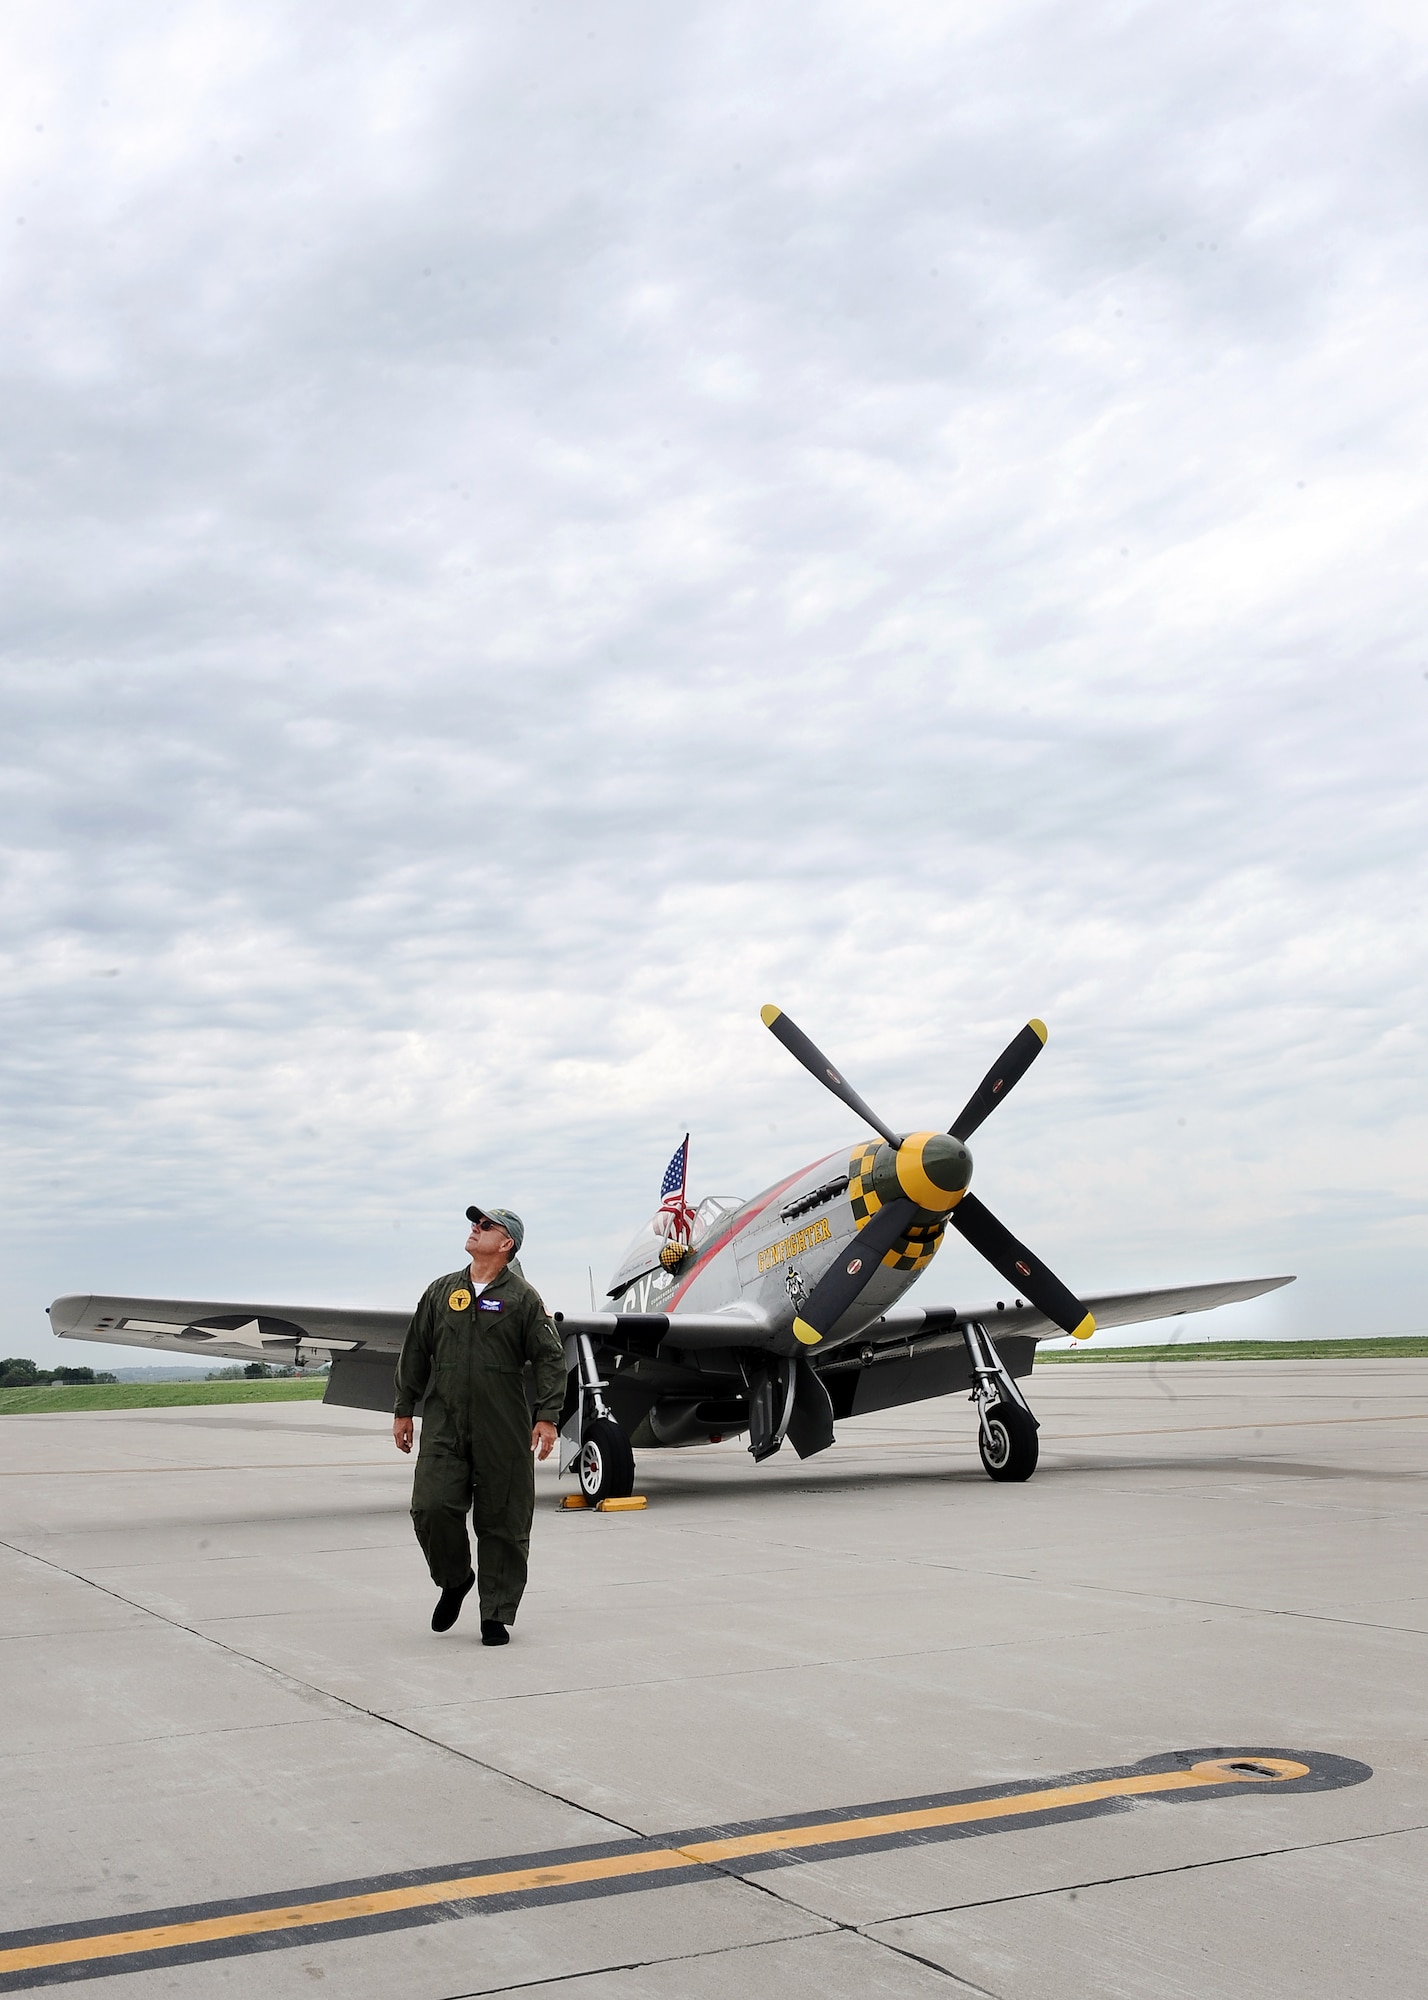 Larry Lumpkin, a P-51 Mustang pilot, keeps an eye on the changing weather overhead as he walks away from the aircraft he just rolled out of the hangar at the Council Bluffs Municipal Airport, Iowa, on June 27. Lumpkin has been the pilot of the P-51 for the past eight Defenders of Freedom Open House and Air Shows at Offutt.  (U.S. Air Force photo by Josh Plueger/Released)